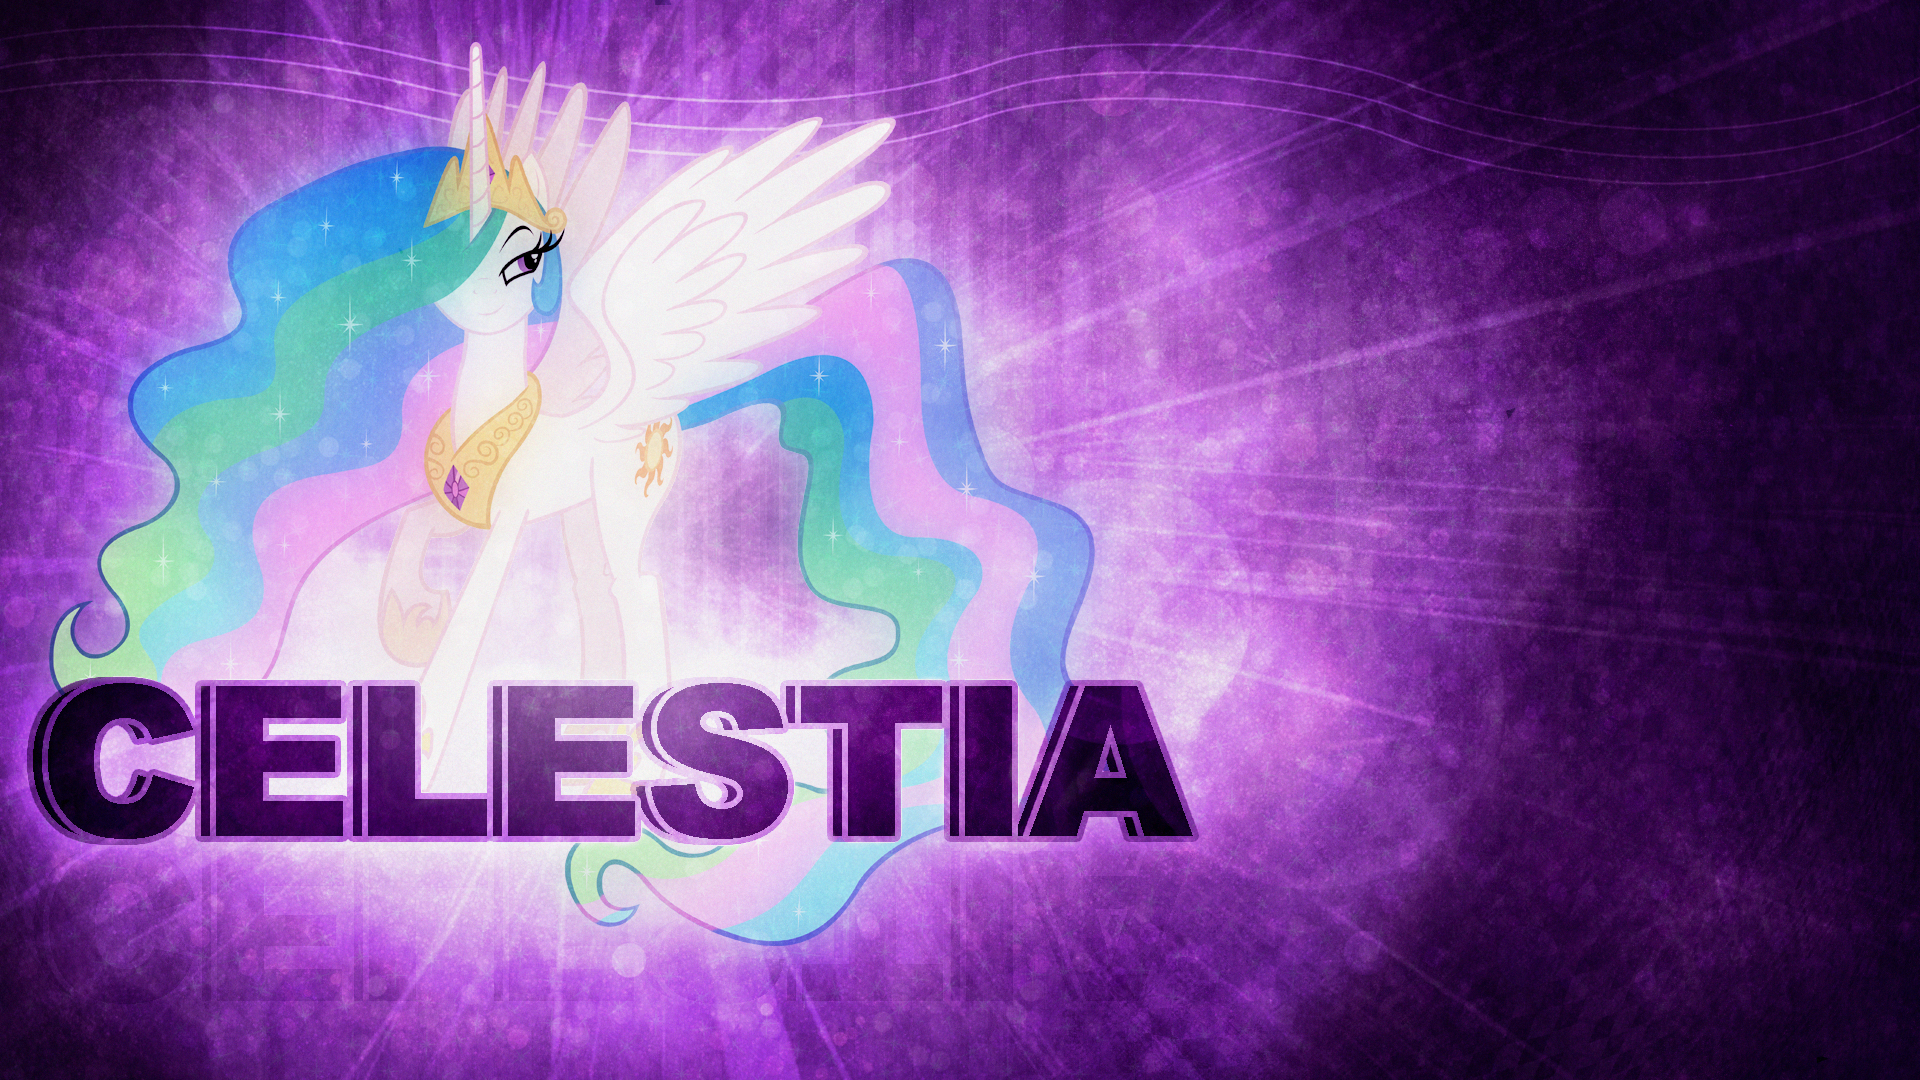 Wallpaper - Celestia by Mackaged and Santafer